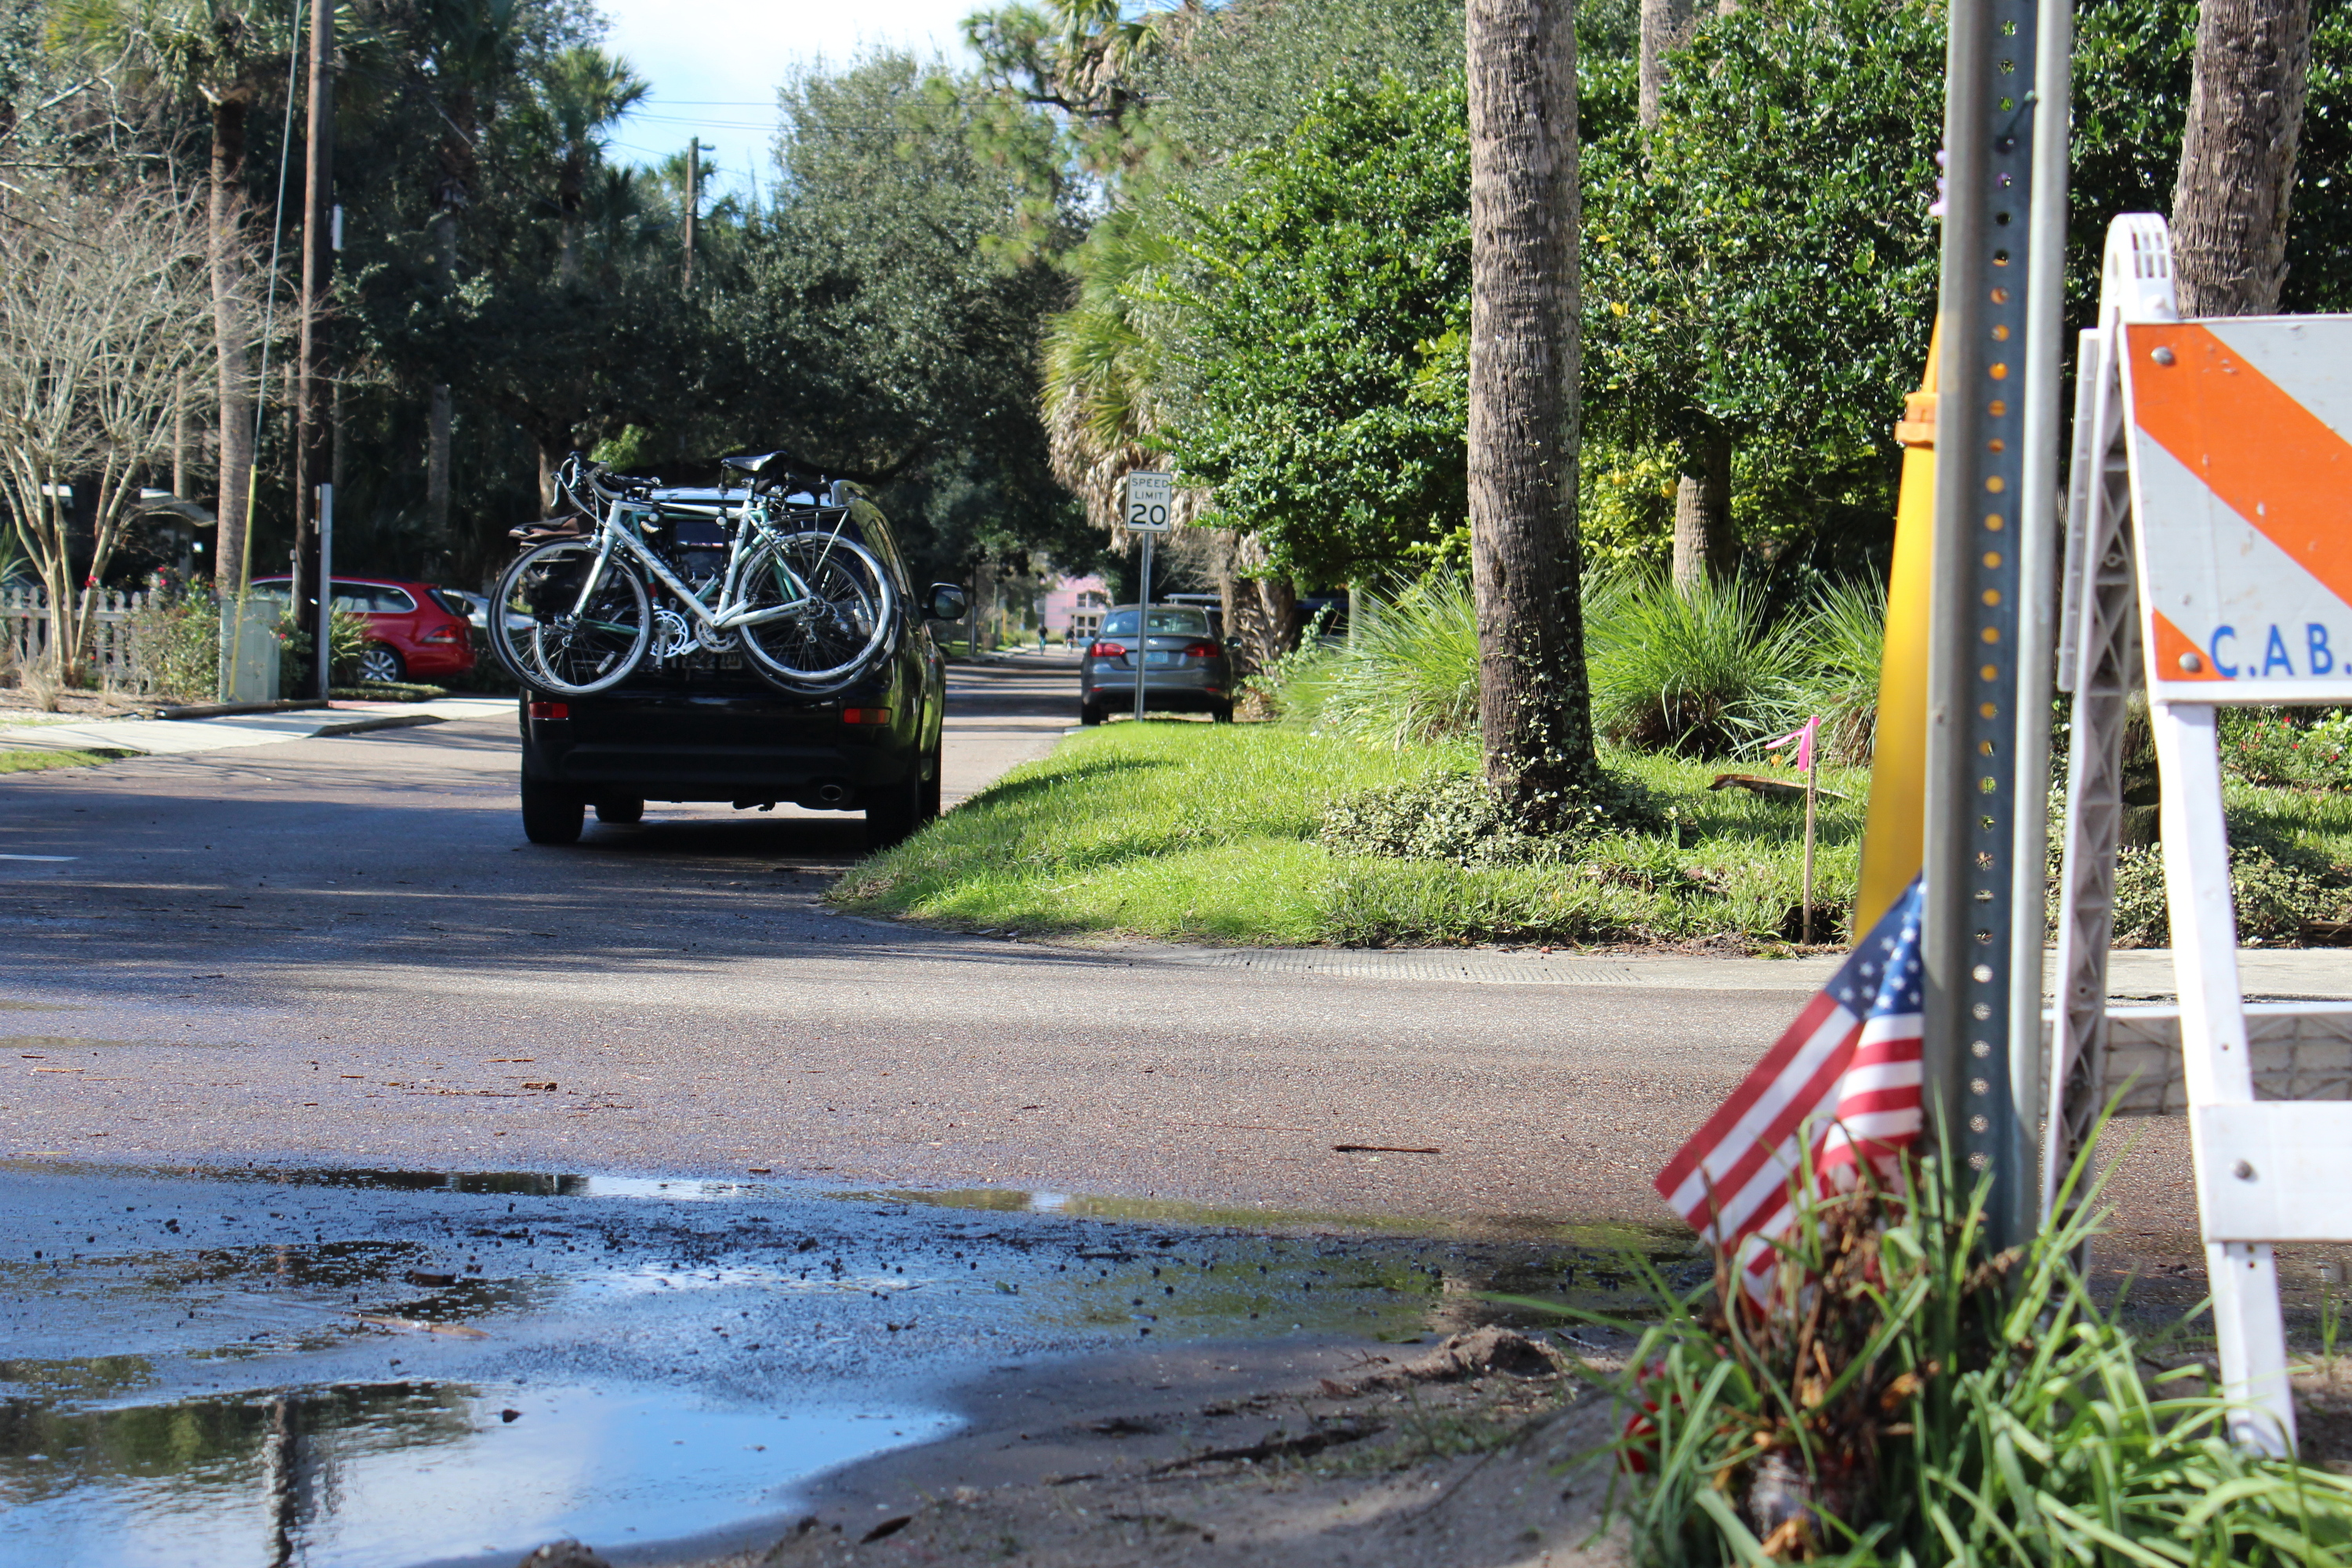 background image, Florida street scene with bikes on the back of a parked van